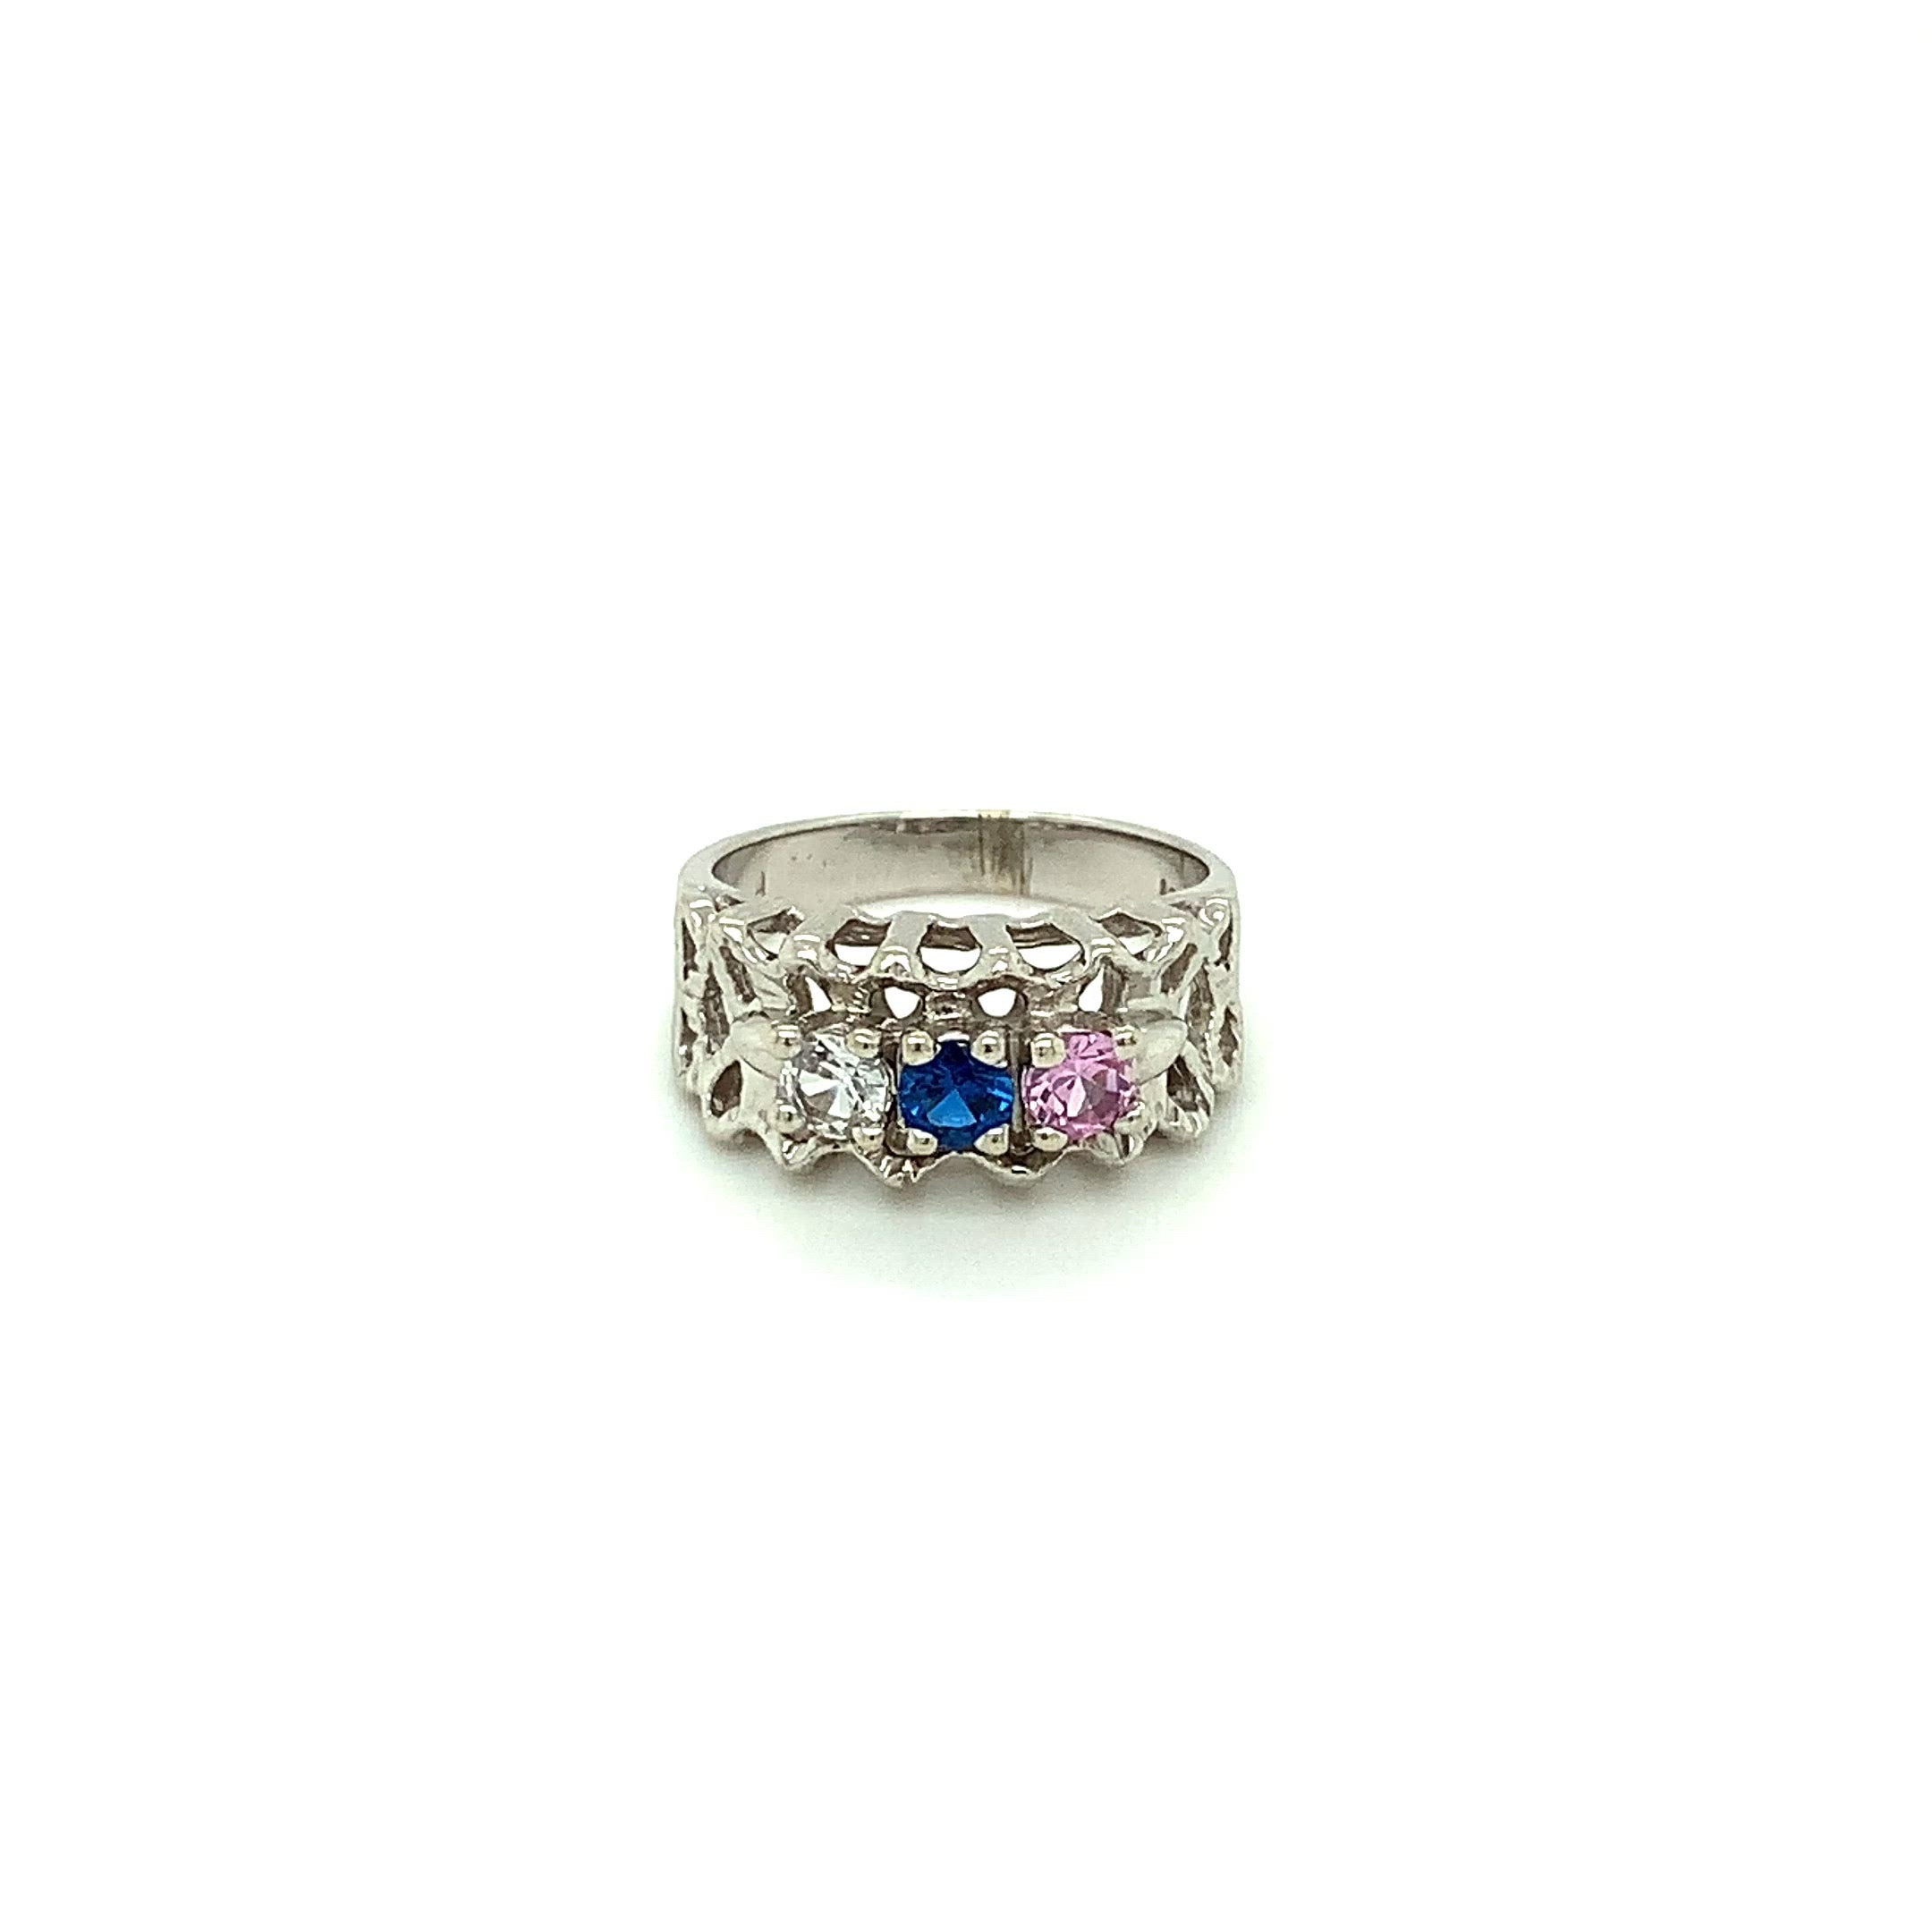 Natural Topaz & Sapphire Ring 10K Solid White Gold .60tcw Gemstone Ring Mothers Ring Birthstone Ring Topaz Ring Vintage Ring Estate Jewelry